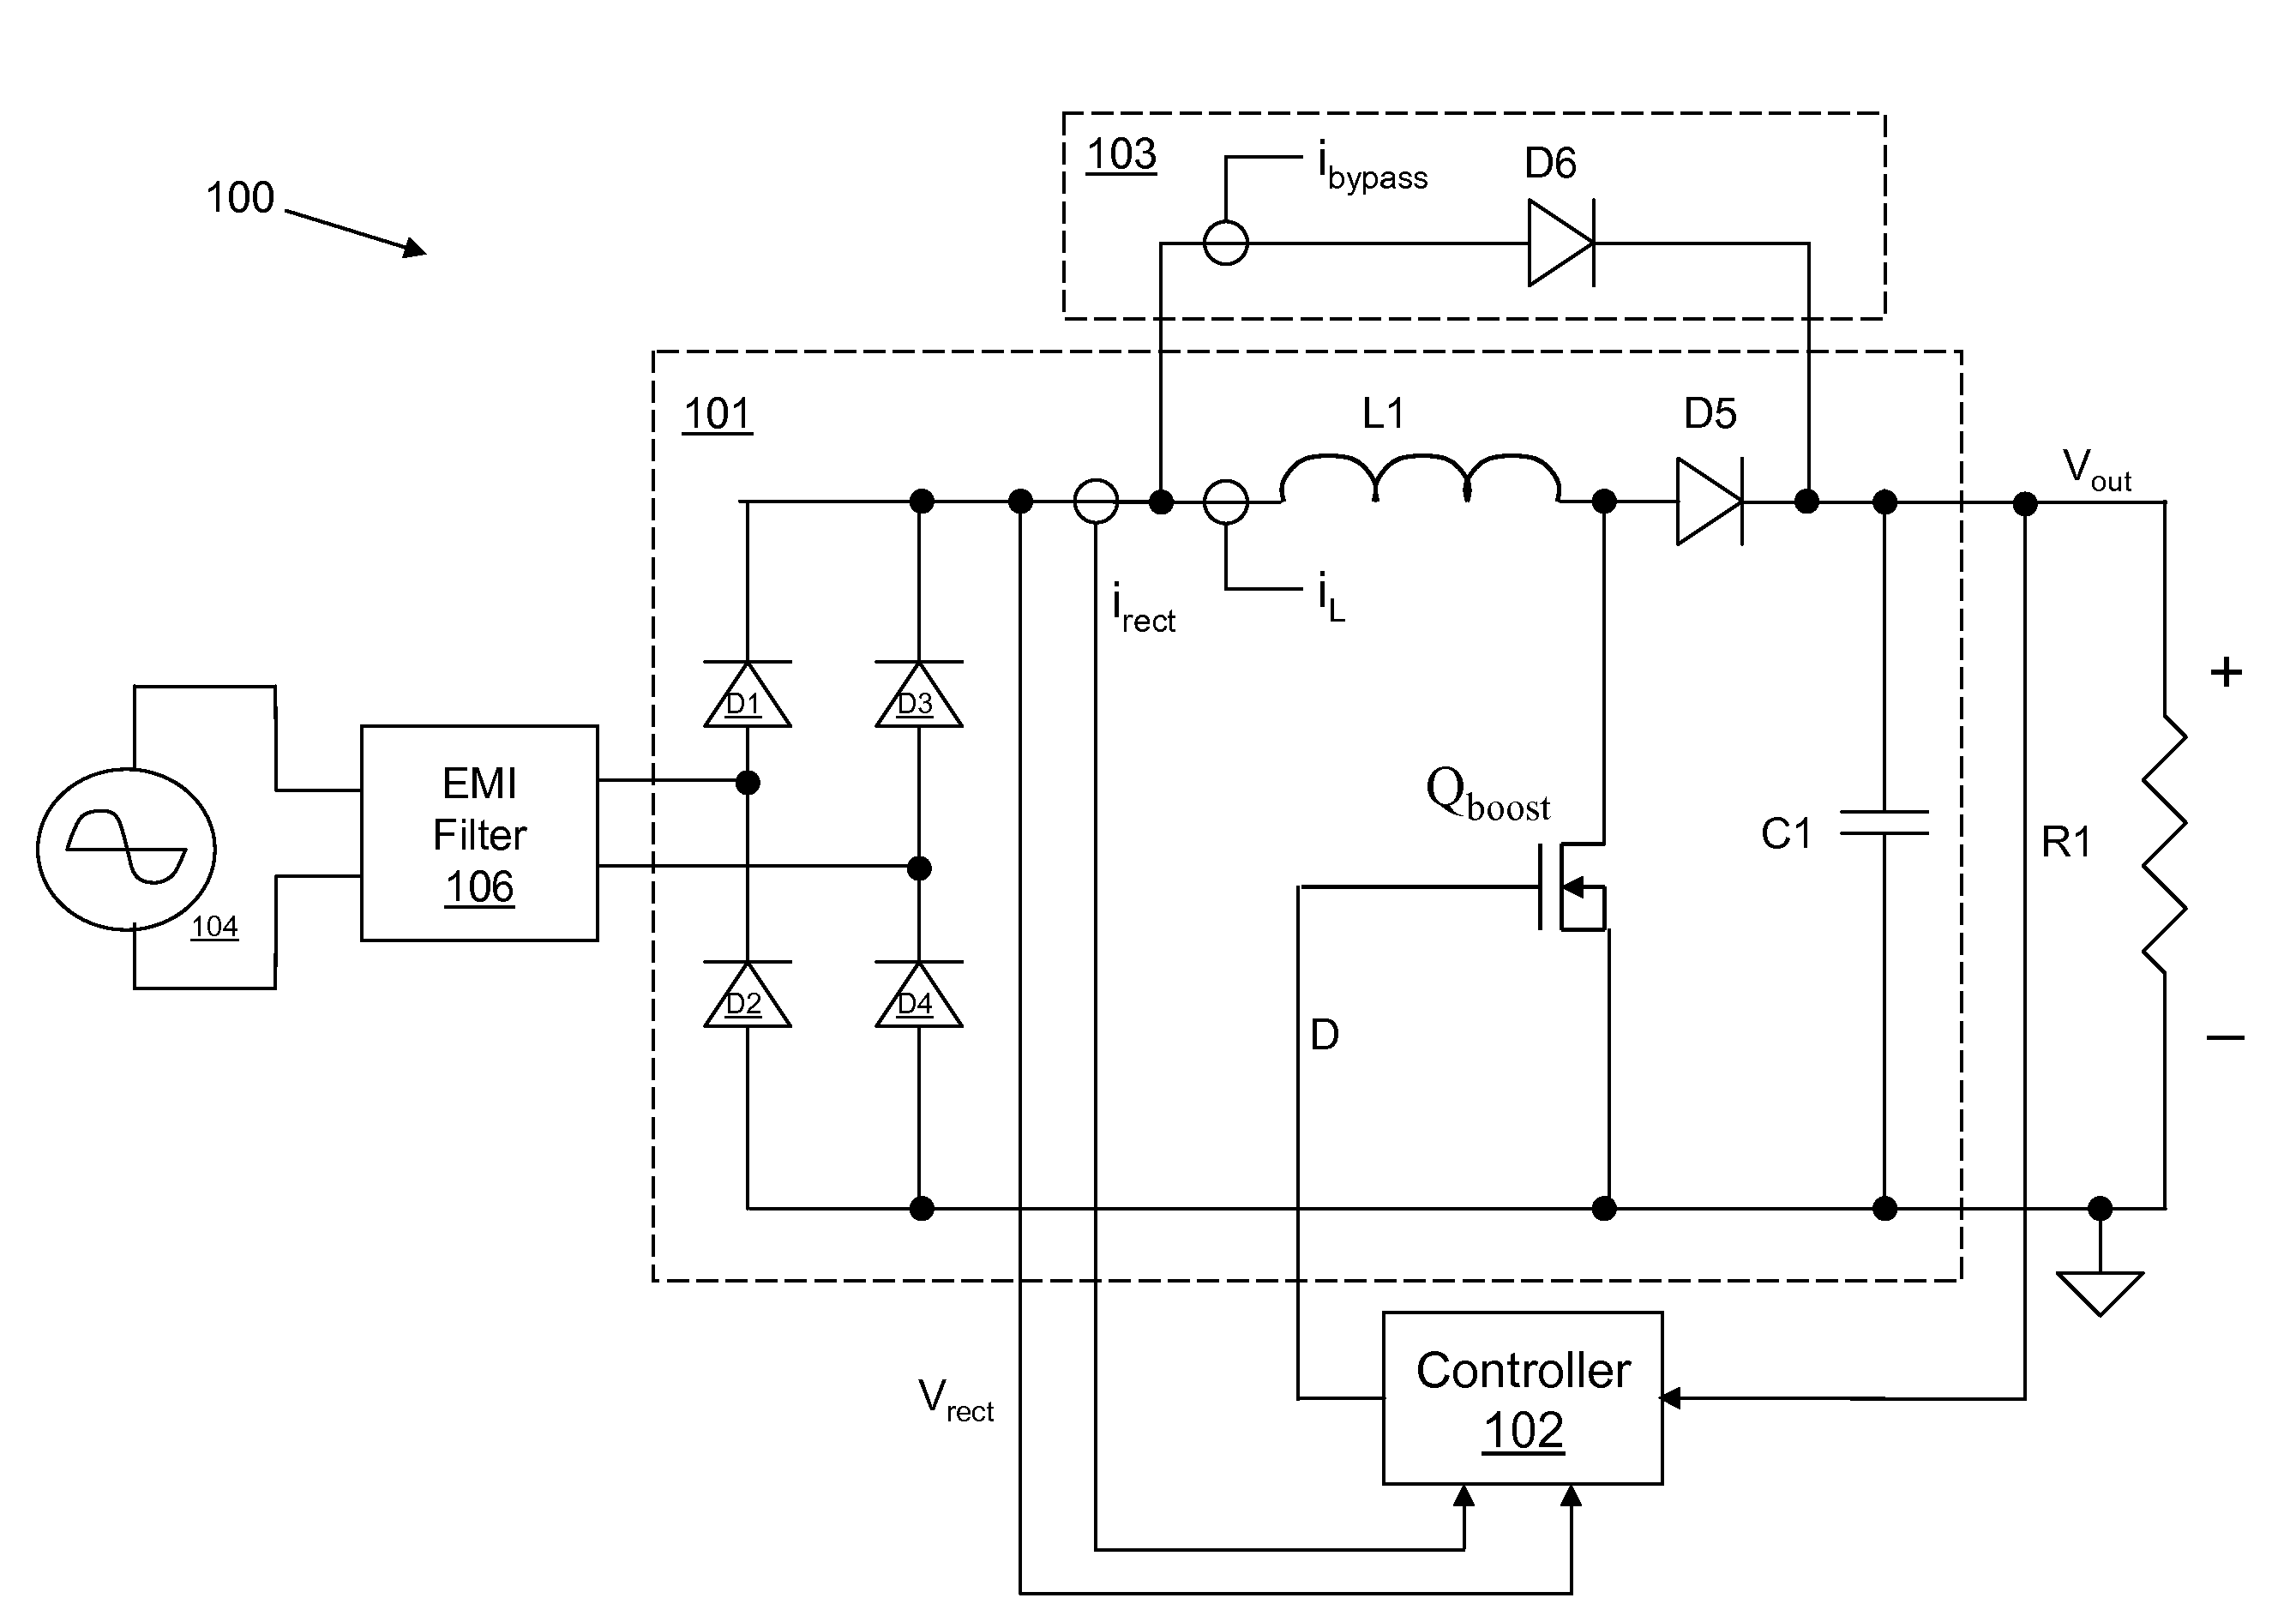 System and Method for Estimating Input Power for a Power Processing Circuit